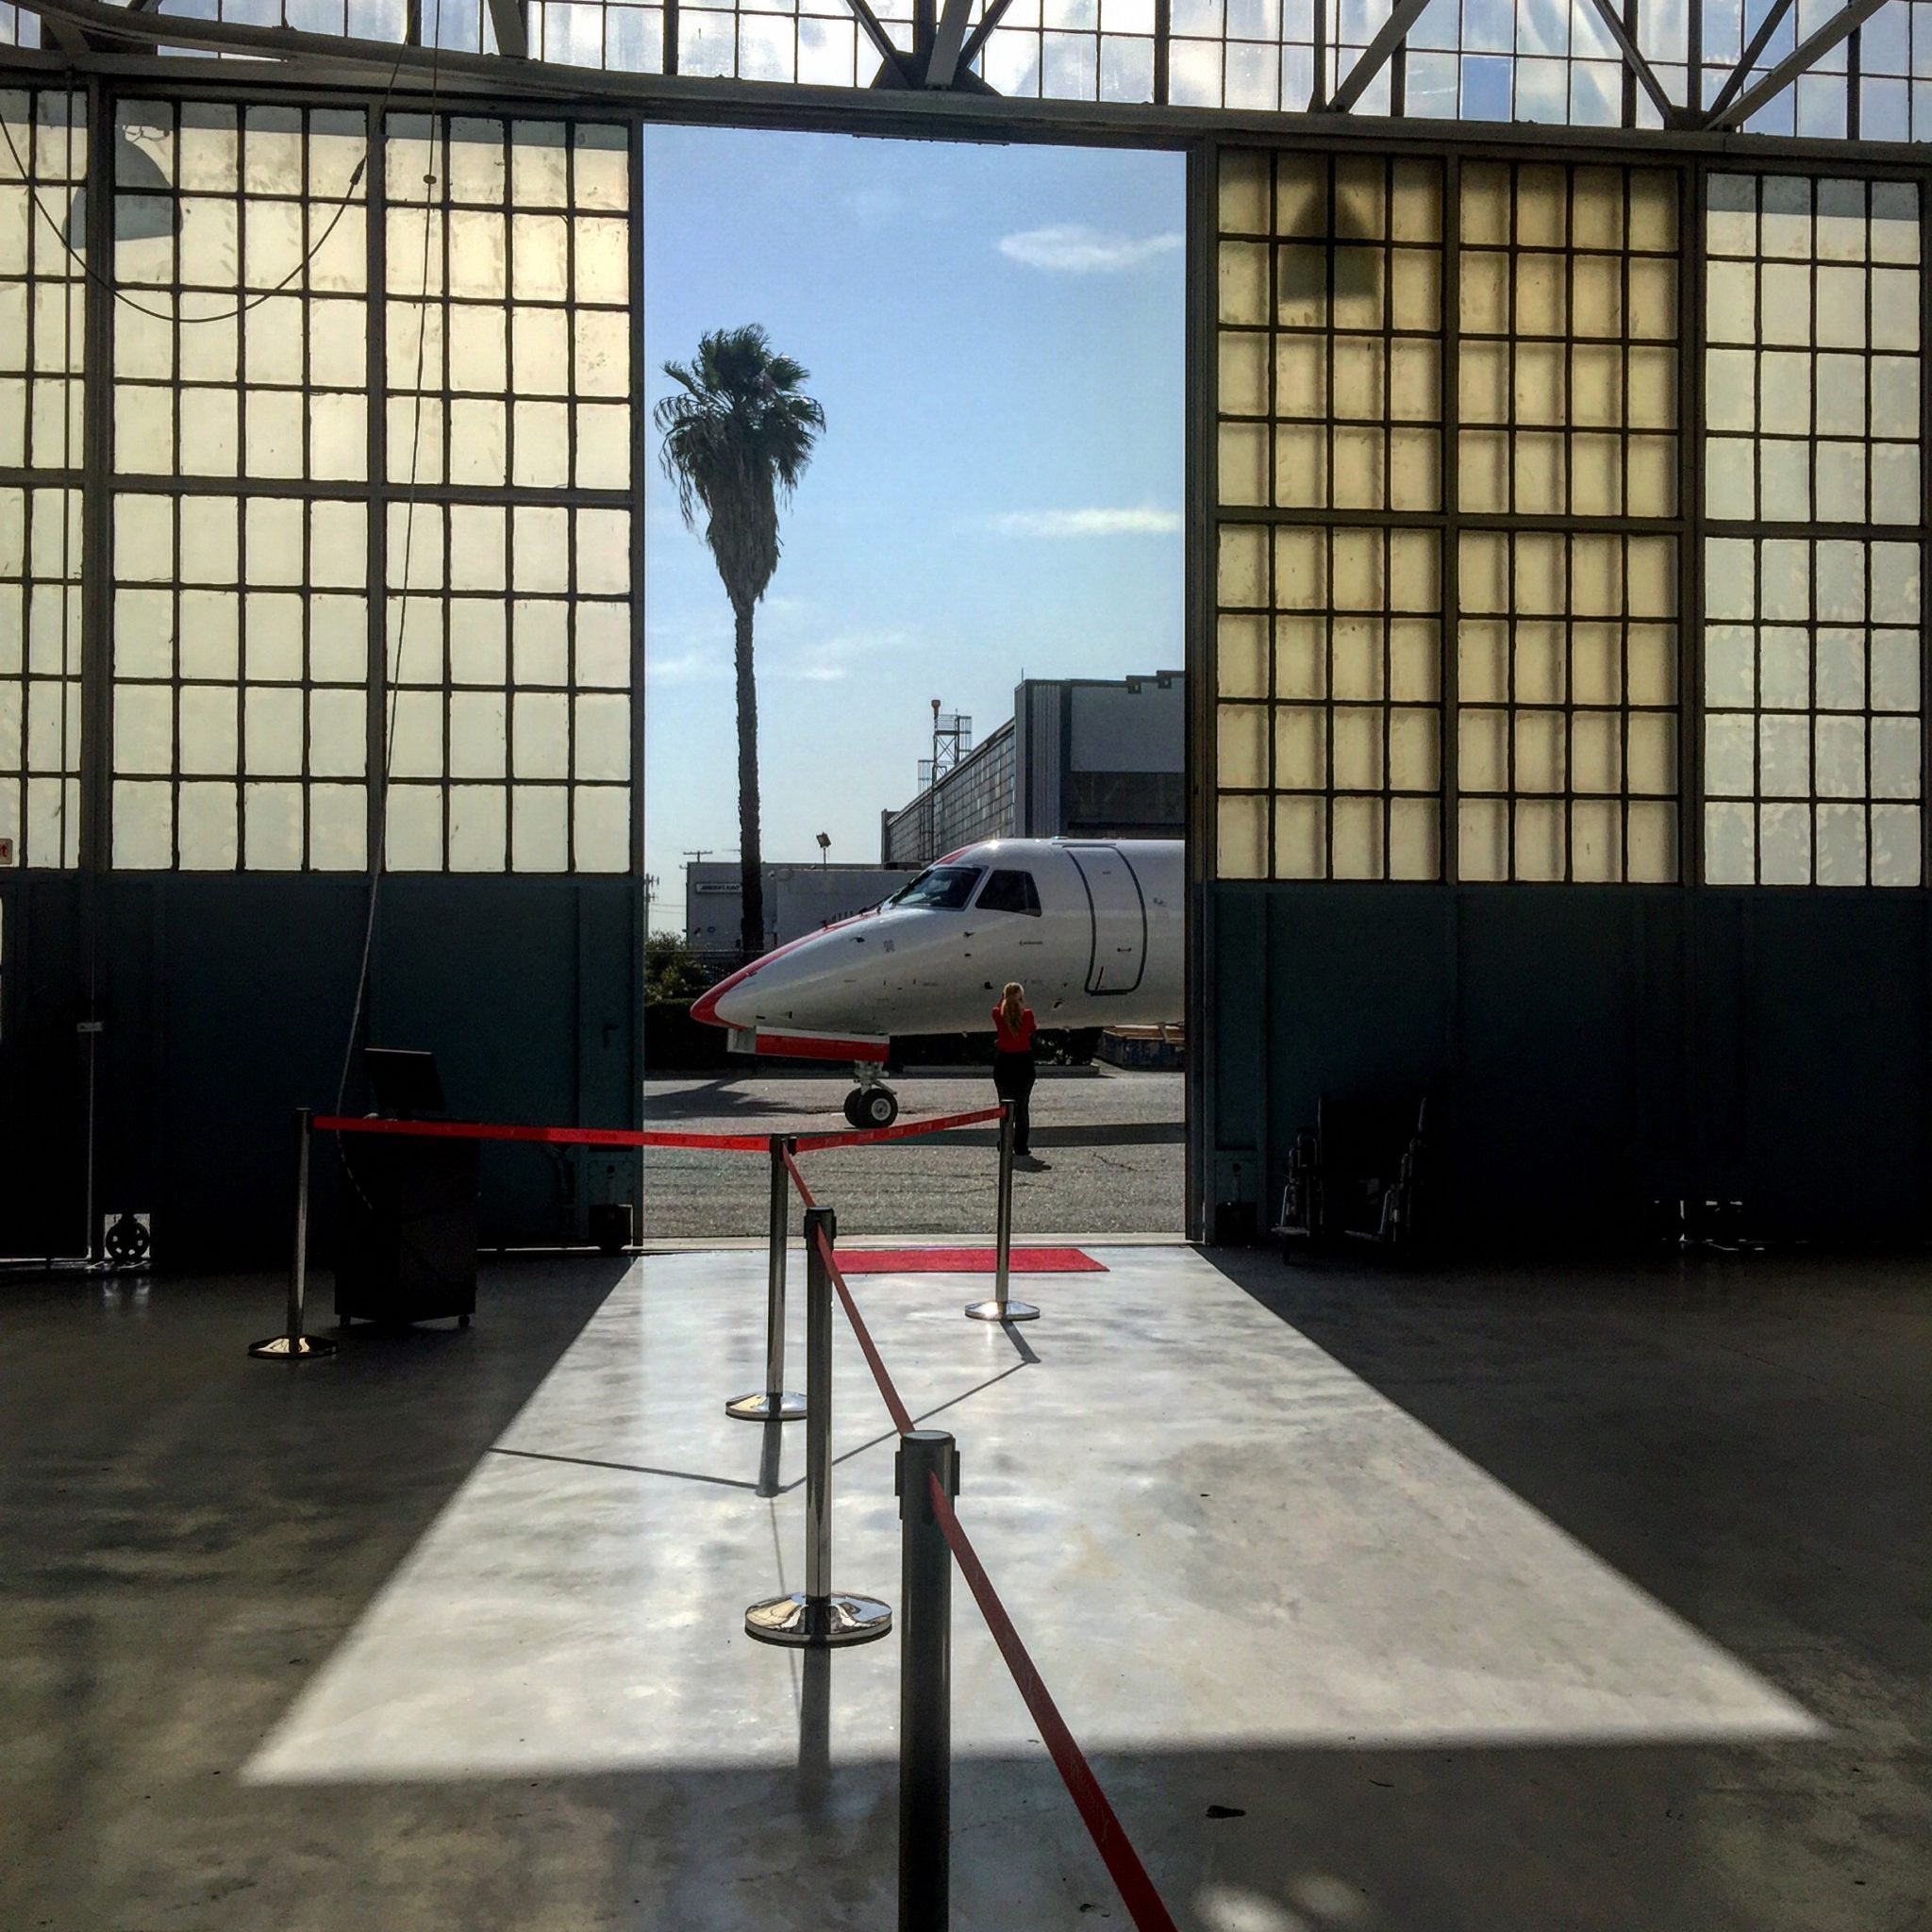 JetSuiteX Burbank almost time to board